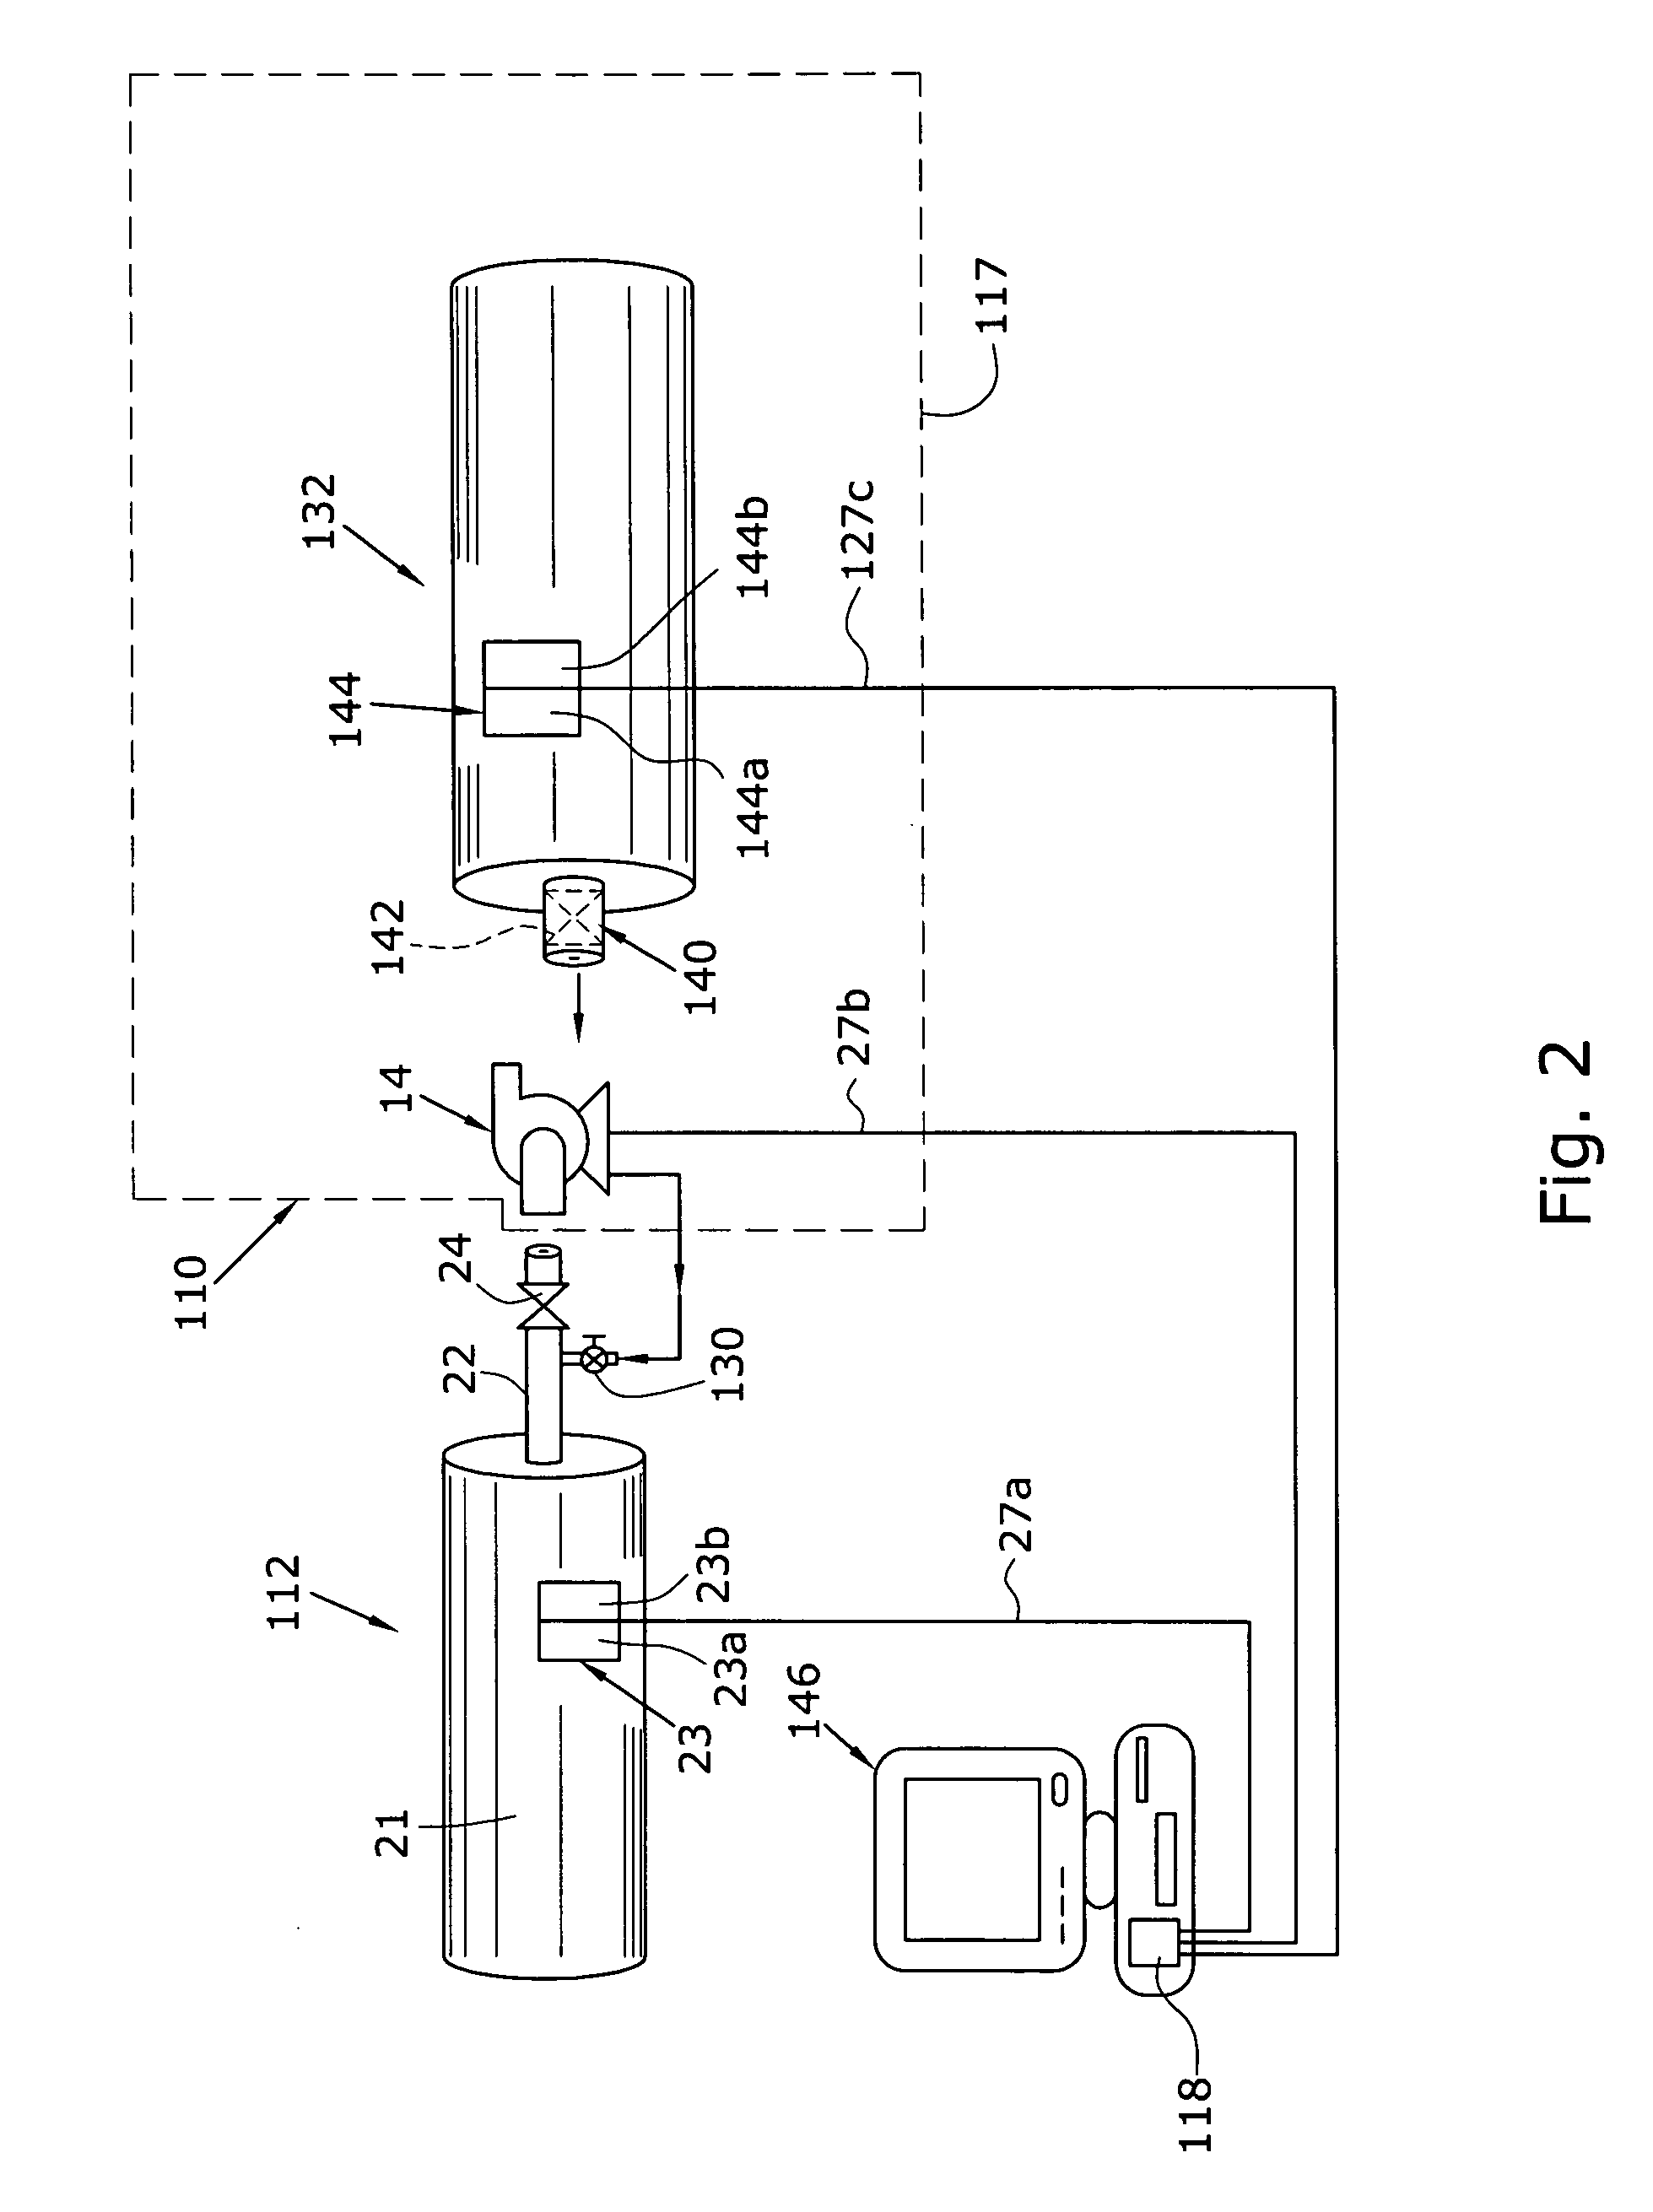 Fuel cell supply including information storage device and control system